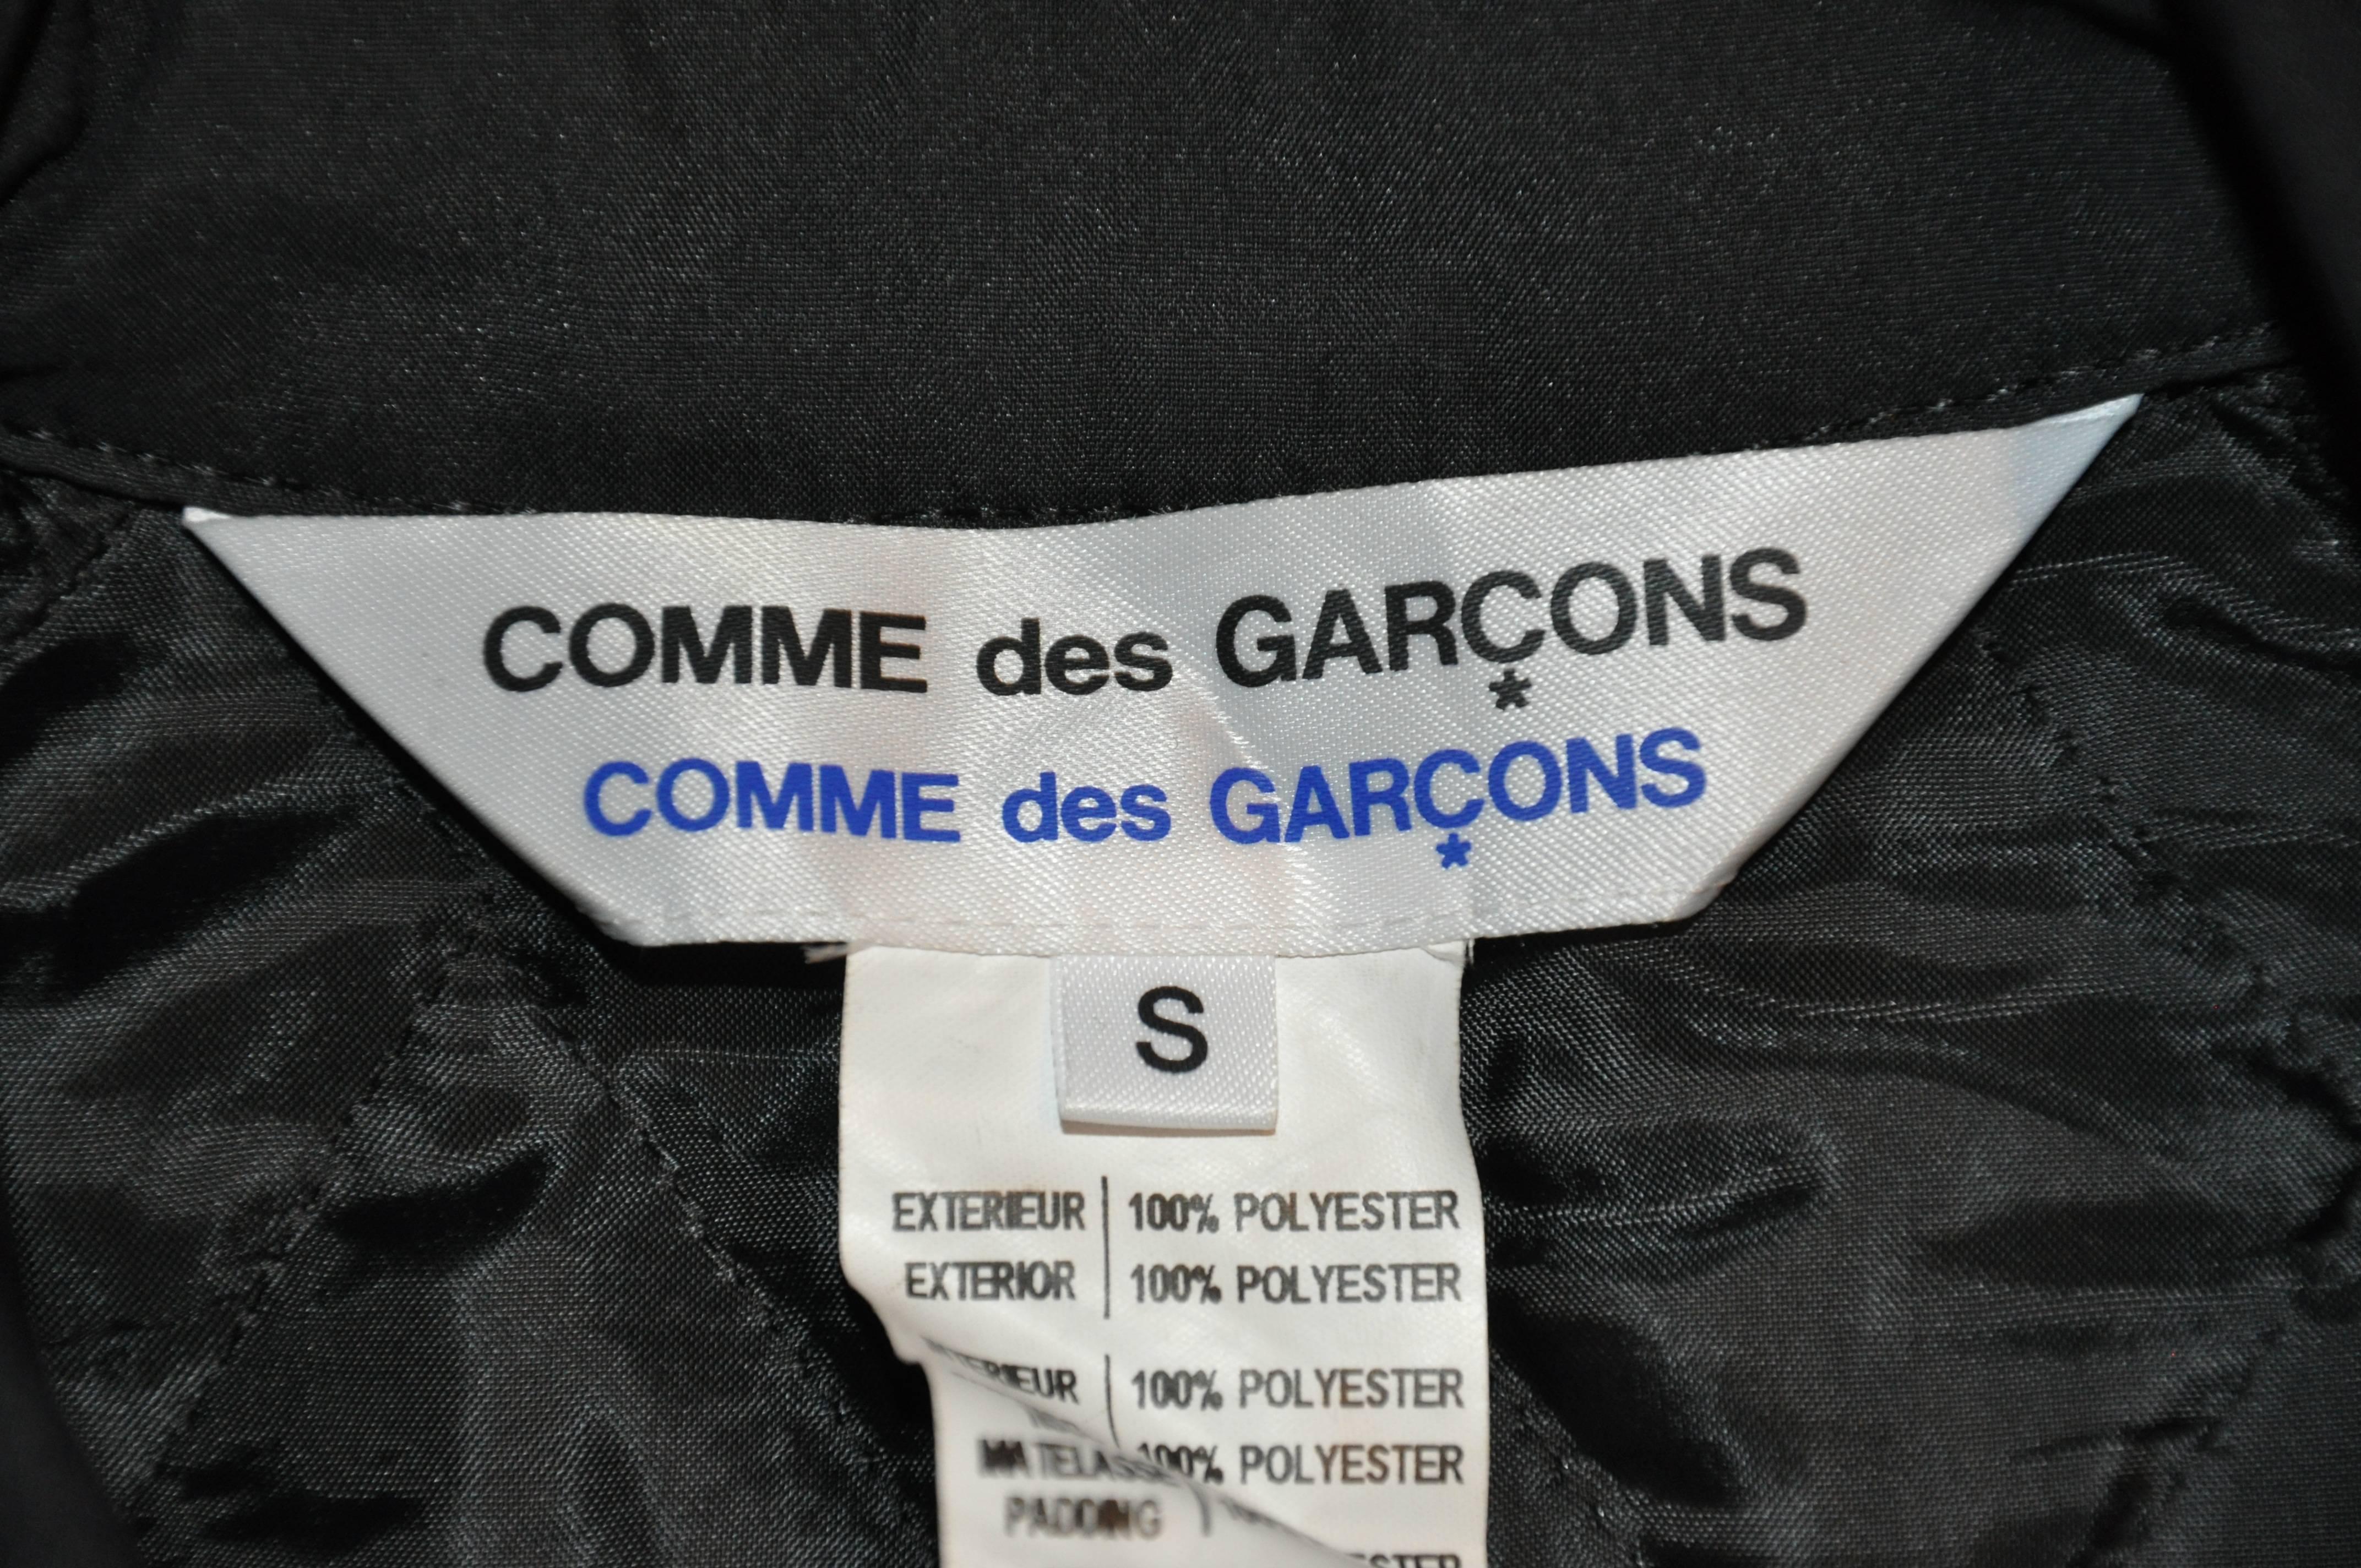        Comme des Garcons 'Comme des Garcons' wicked black nylon with quilted lining zippered motorcycle poncho if accented with two zipper pockets as well as one breast zipper pocket on front. There is also a set-in with a flap and snap closing on